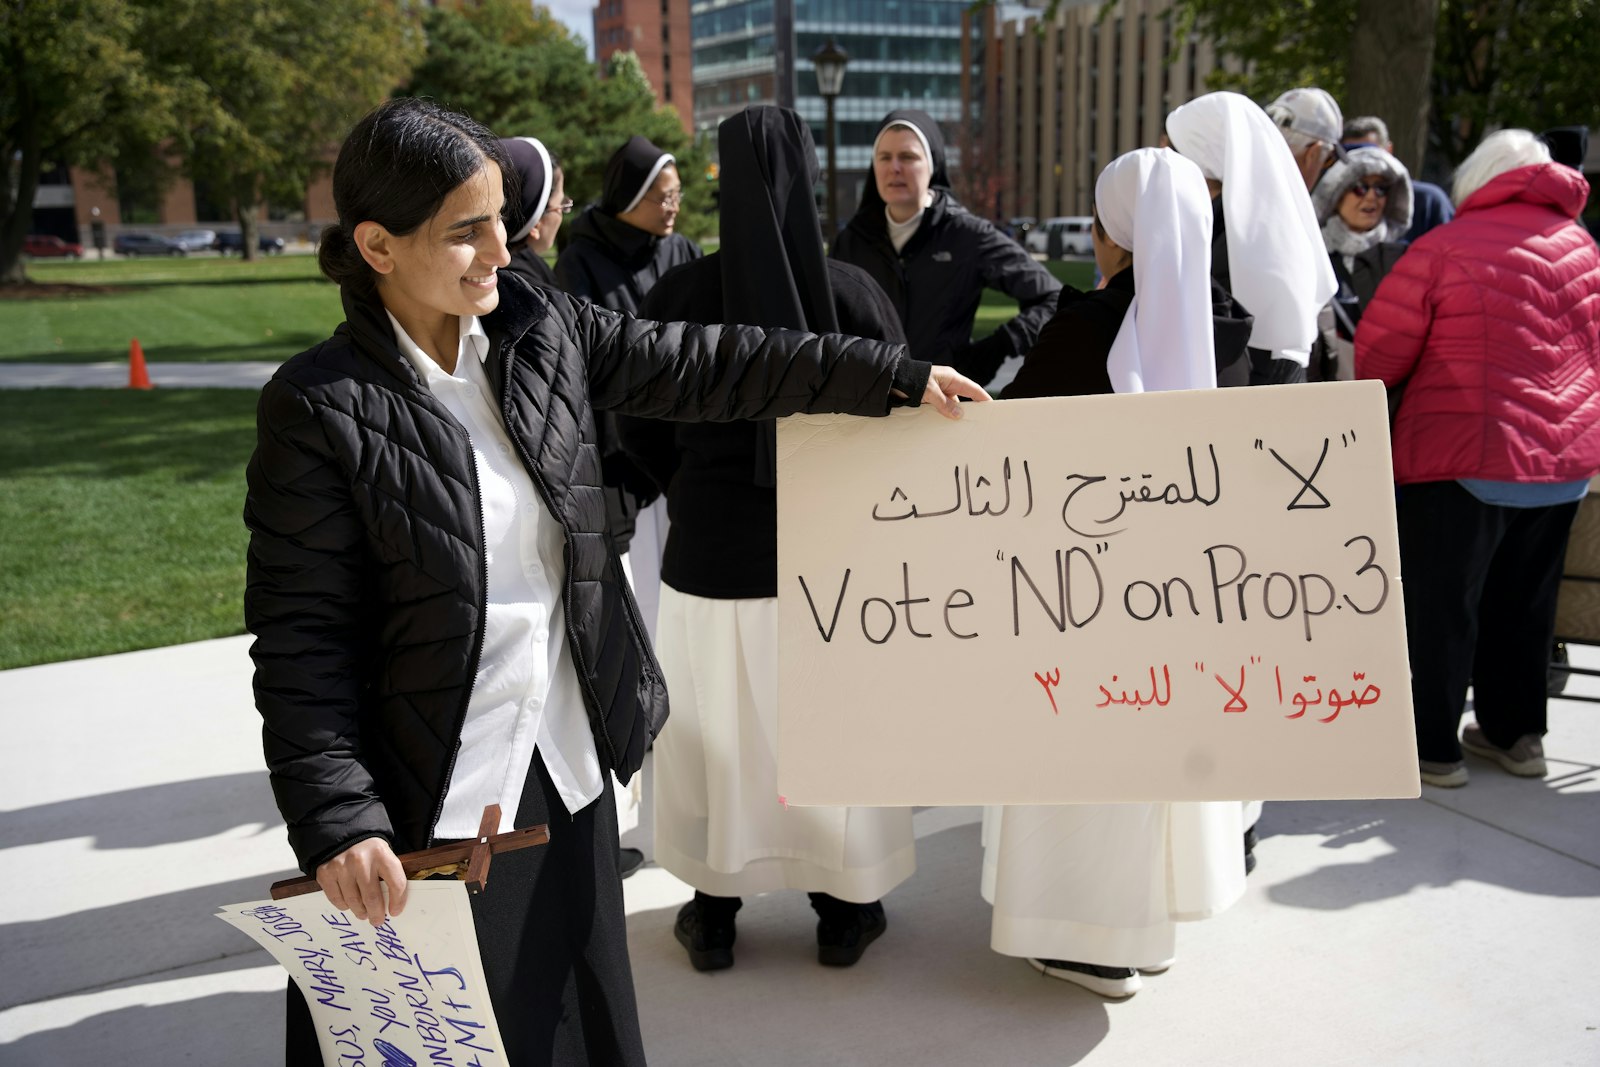 A Chaldean sister holds up a sign written in English and Arabic urging voters to reject Proposal 3.